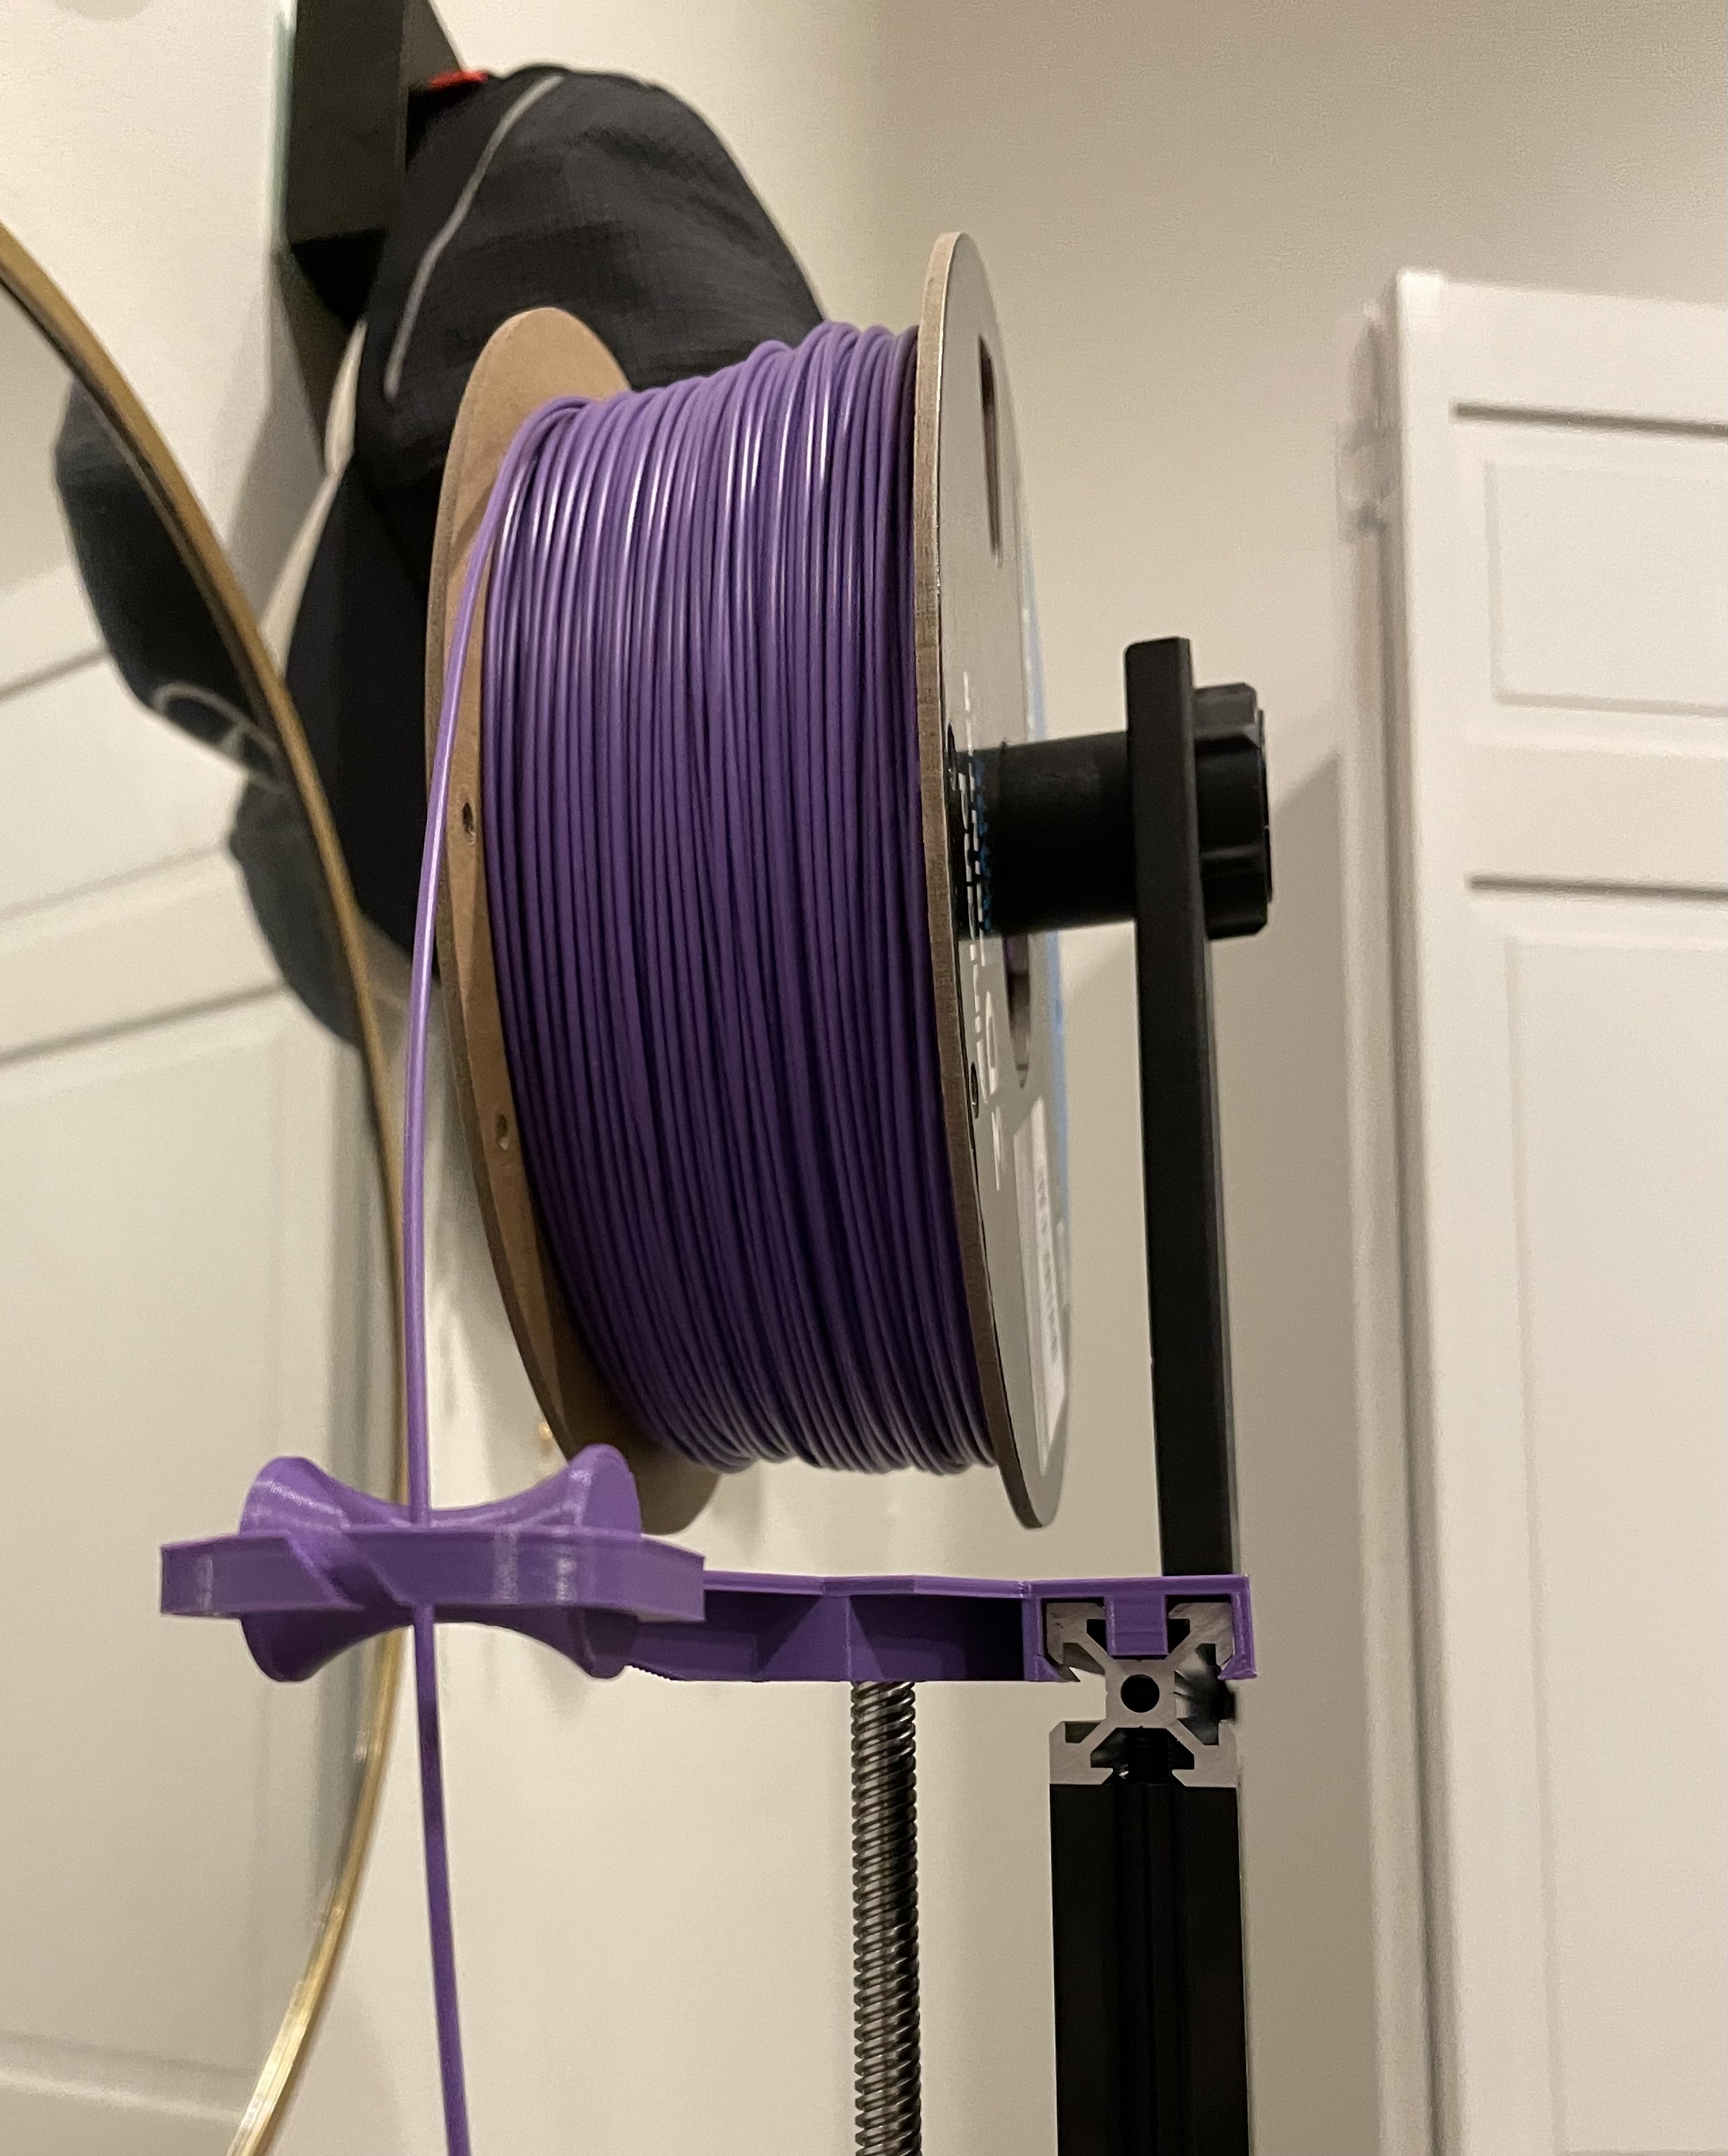 A spool of filament mounted on top of a 3D printer.  The filament is directed through an arm that's attached to the printer.